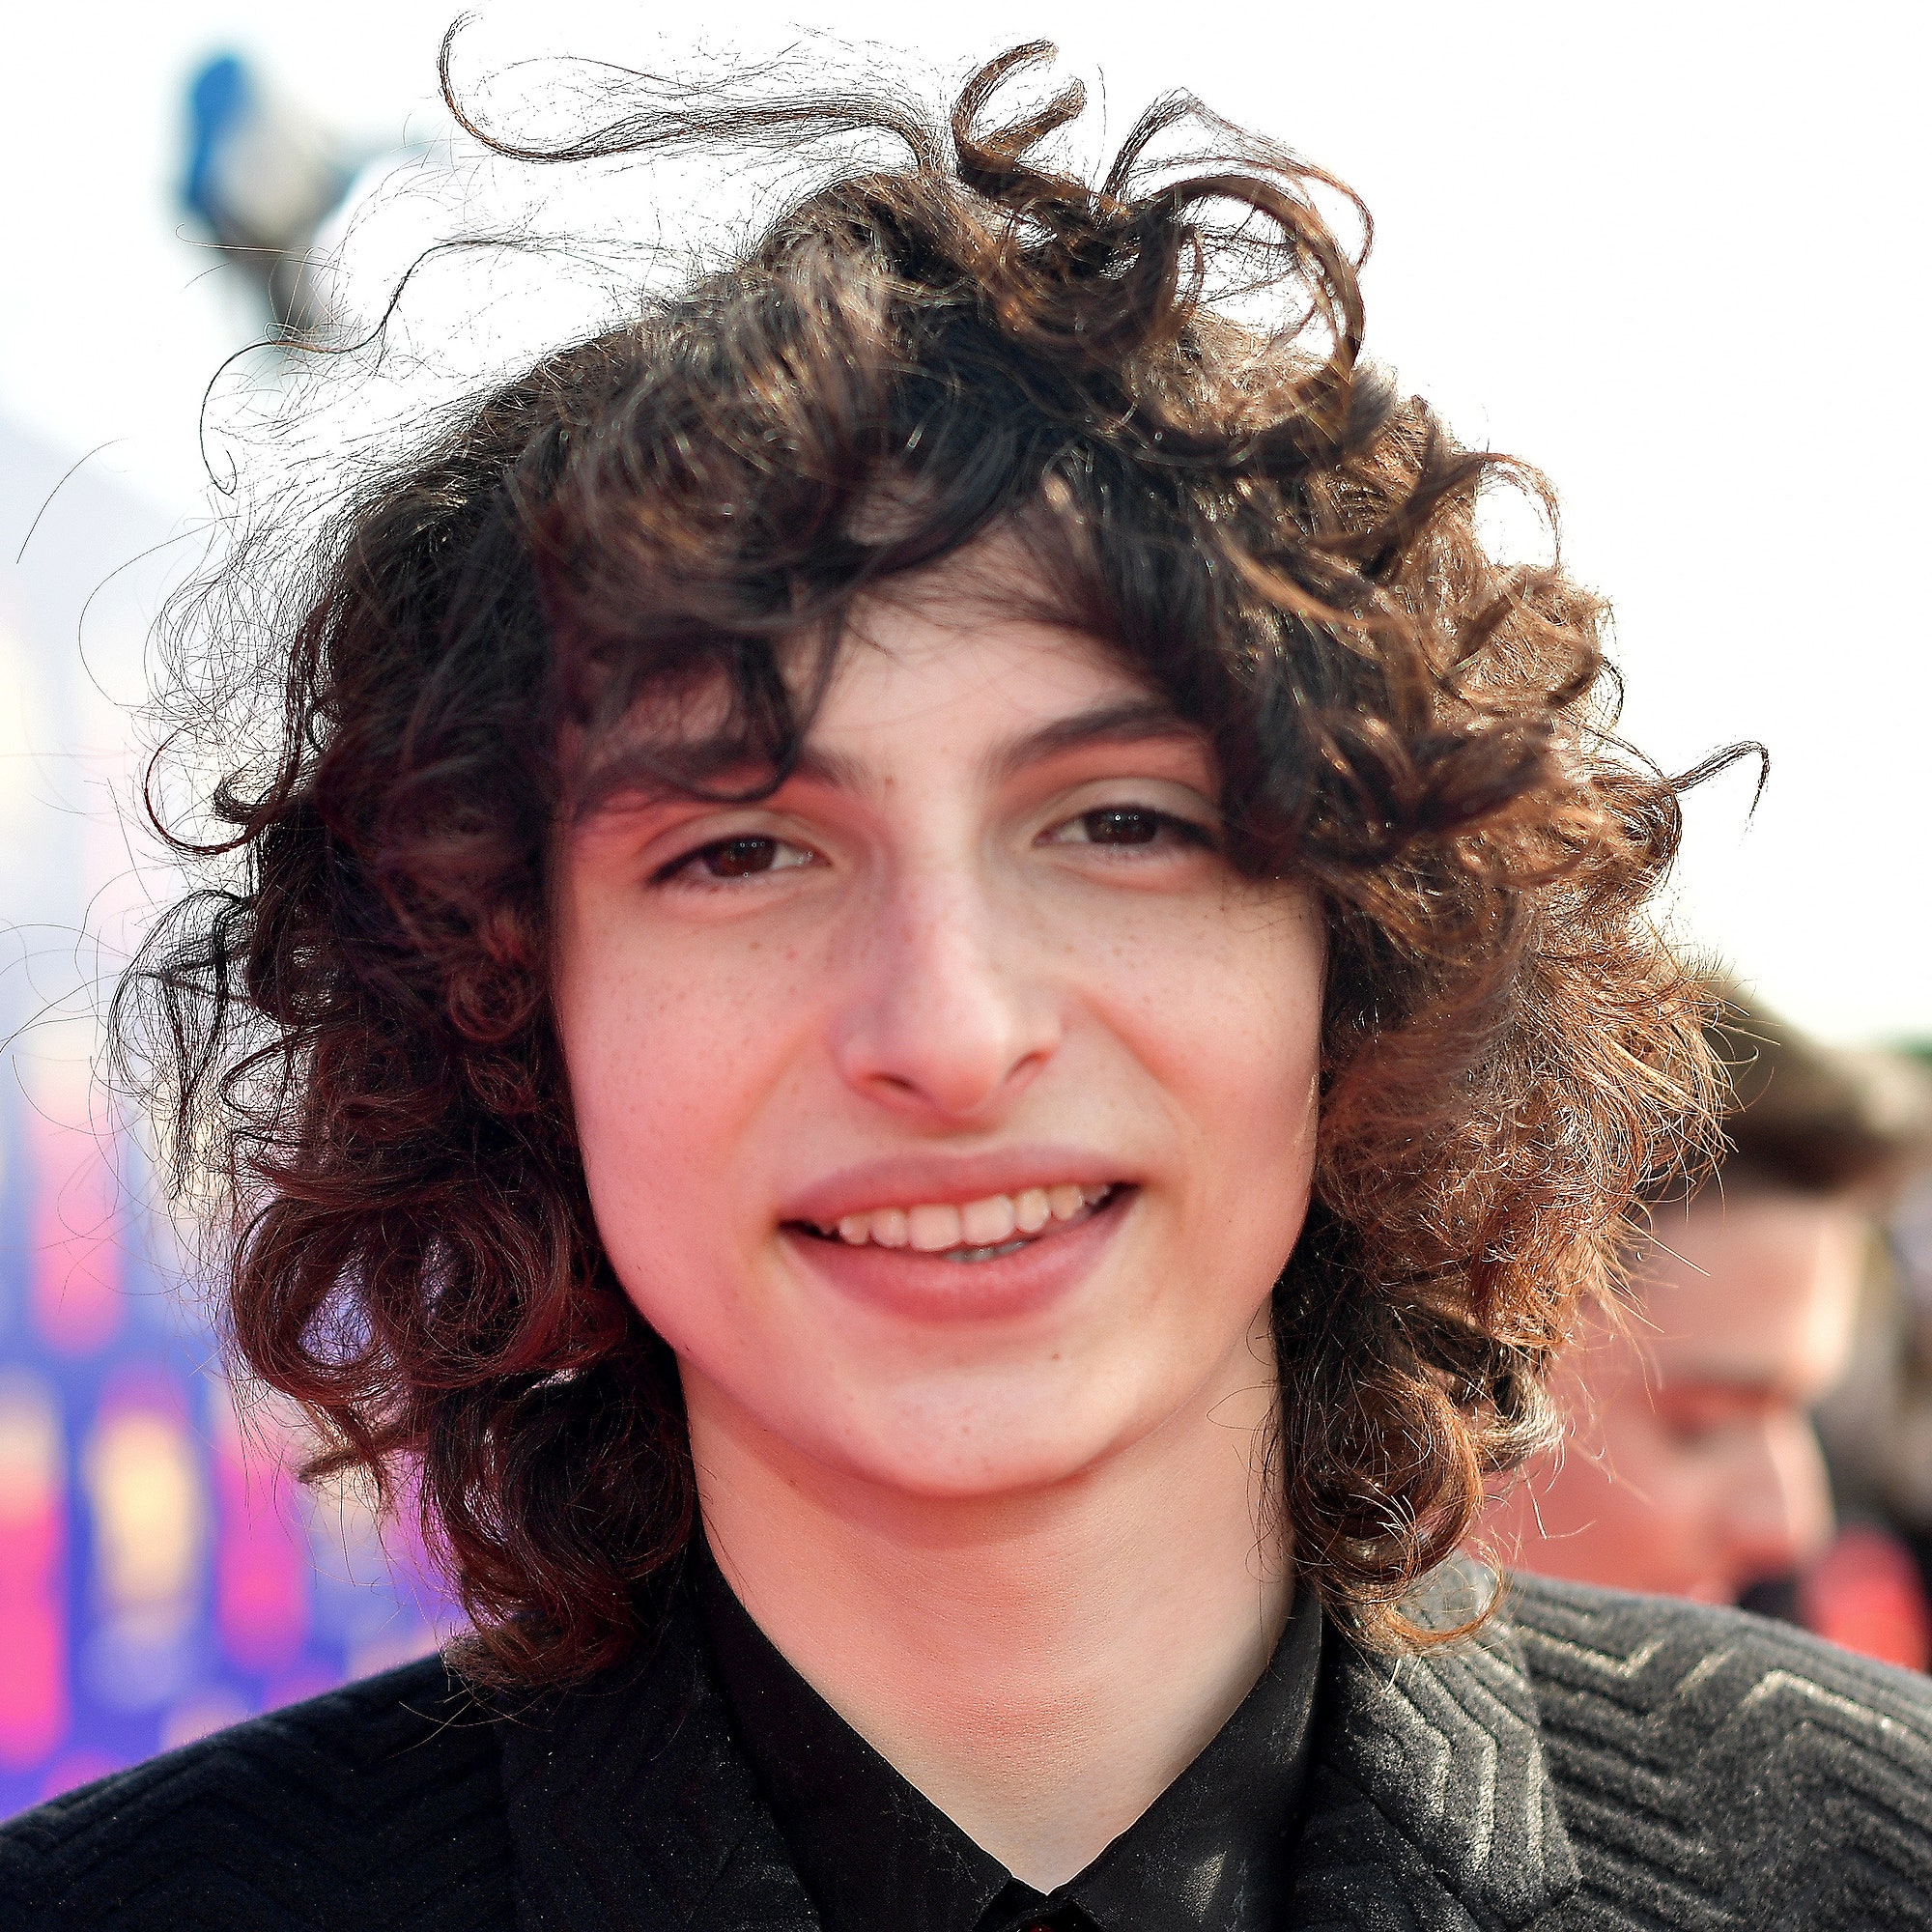 Finn Wolfhard Has a Straightened Mullet Haircut Now